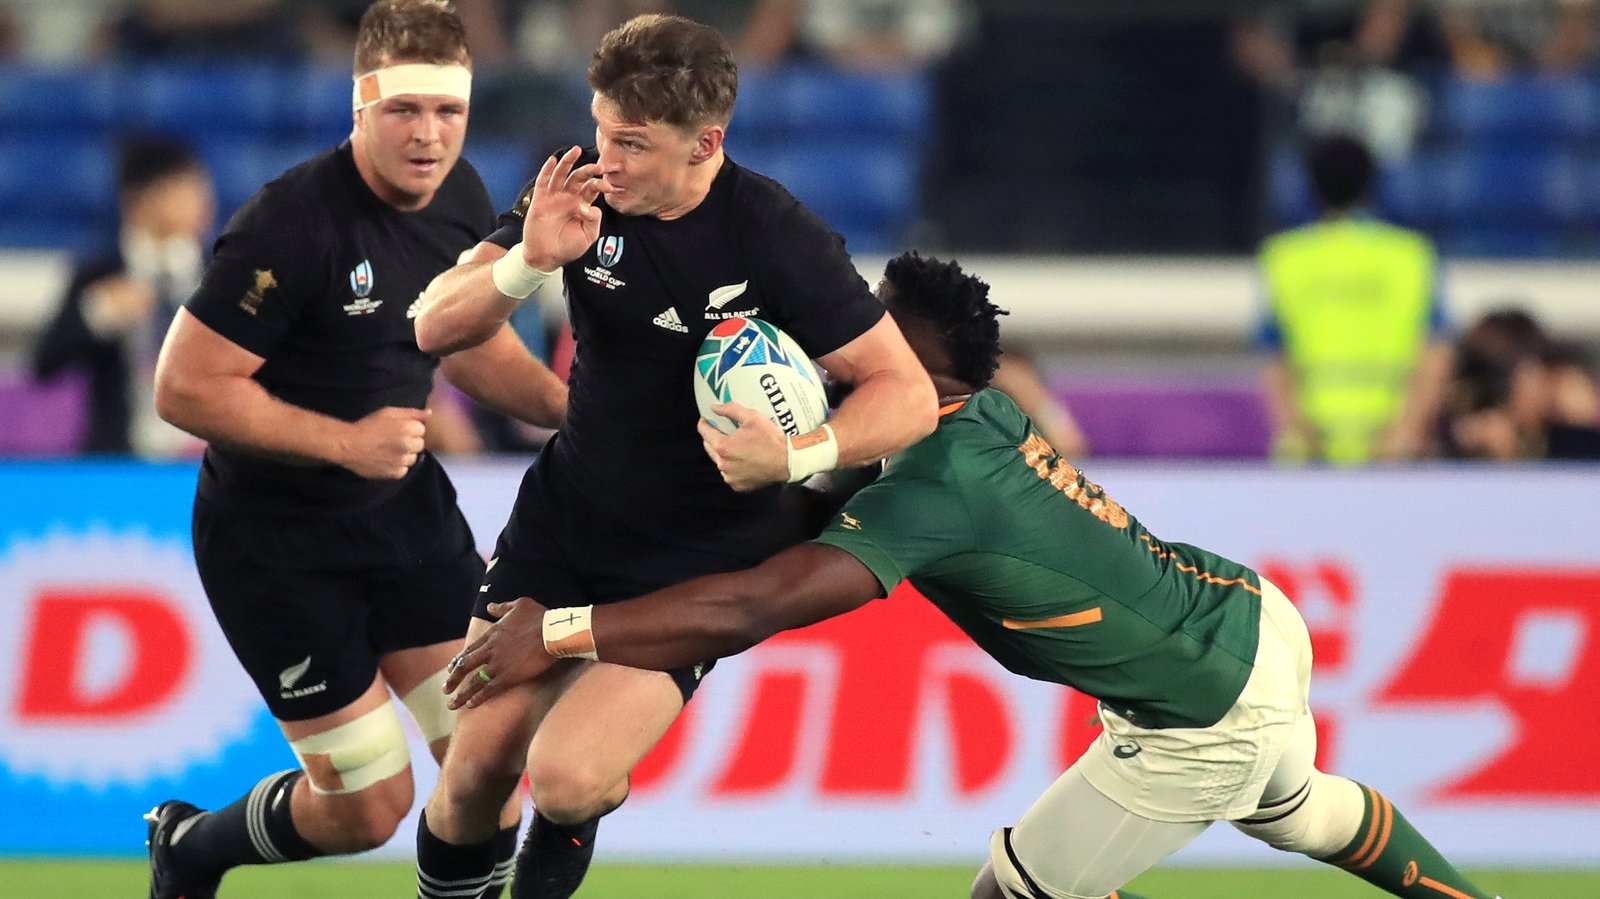 All Blacks get the better of South Africa in thriller